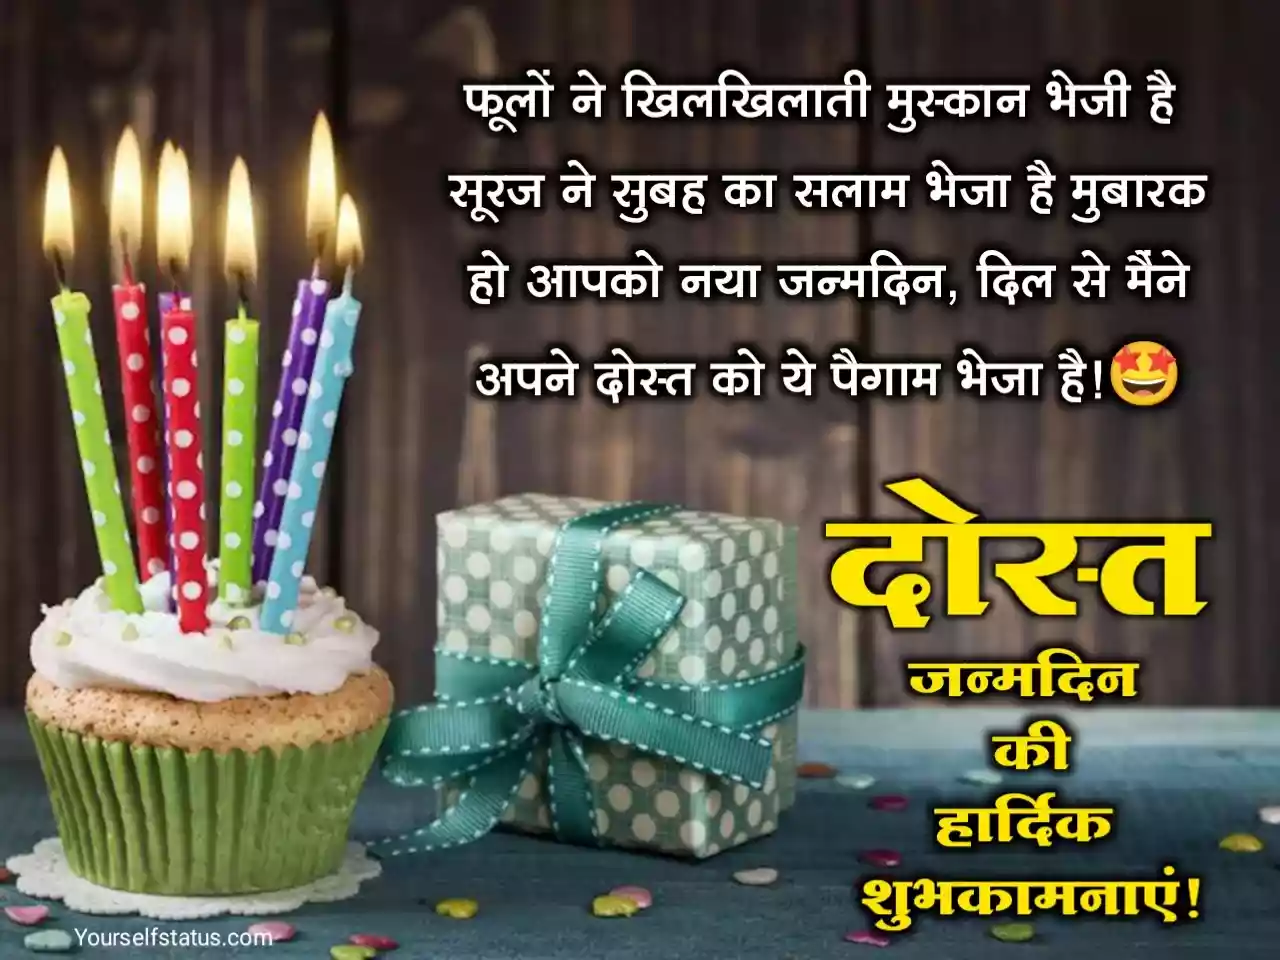 Happy birthday images for friend in hindi